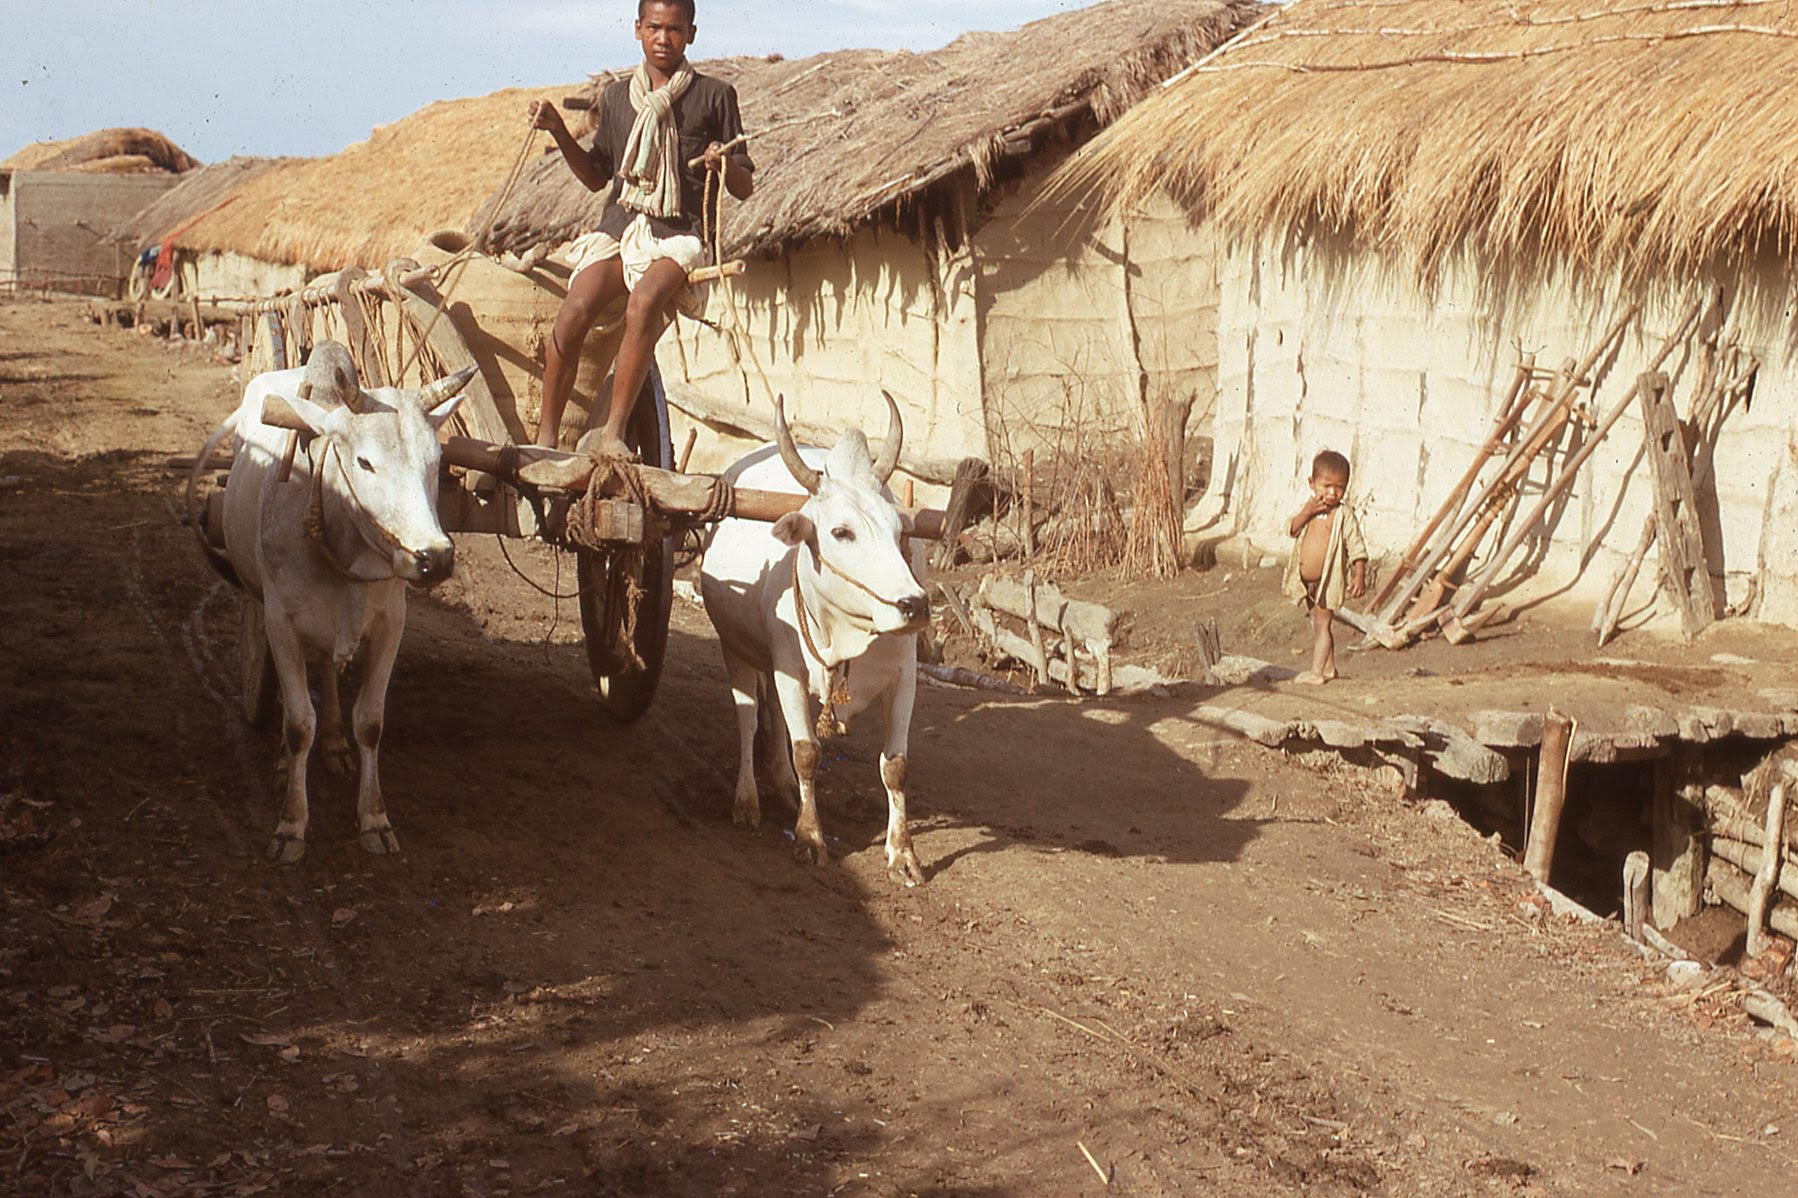 A man rides through village carrying grain on an ox cart, led by two oxes, as a child looks on from a walkway between the houses.